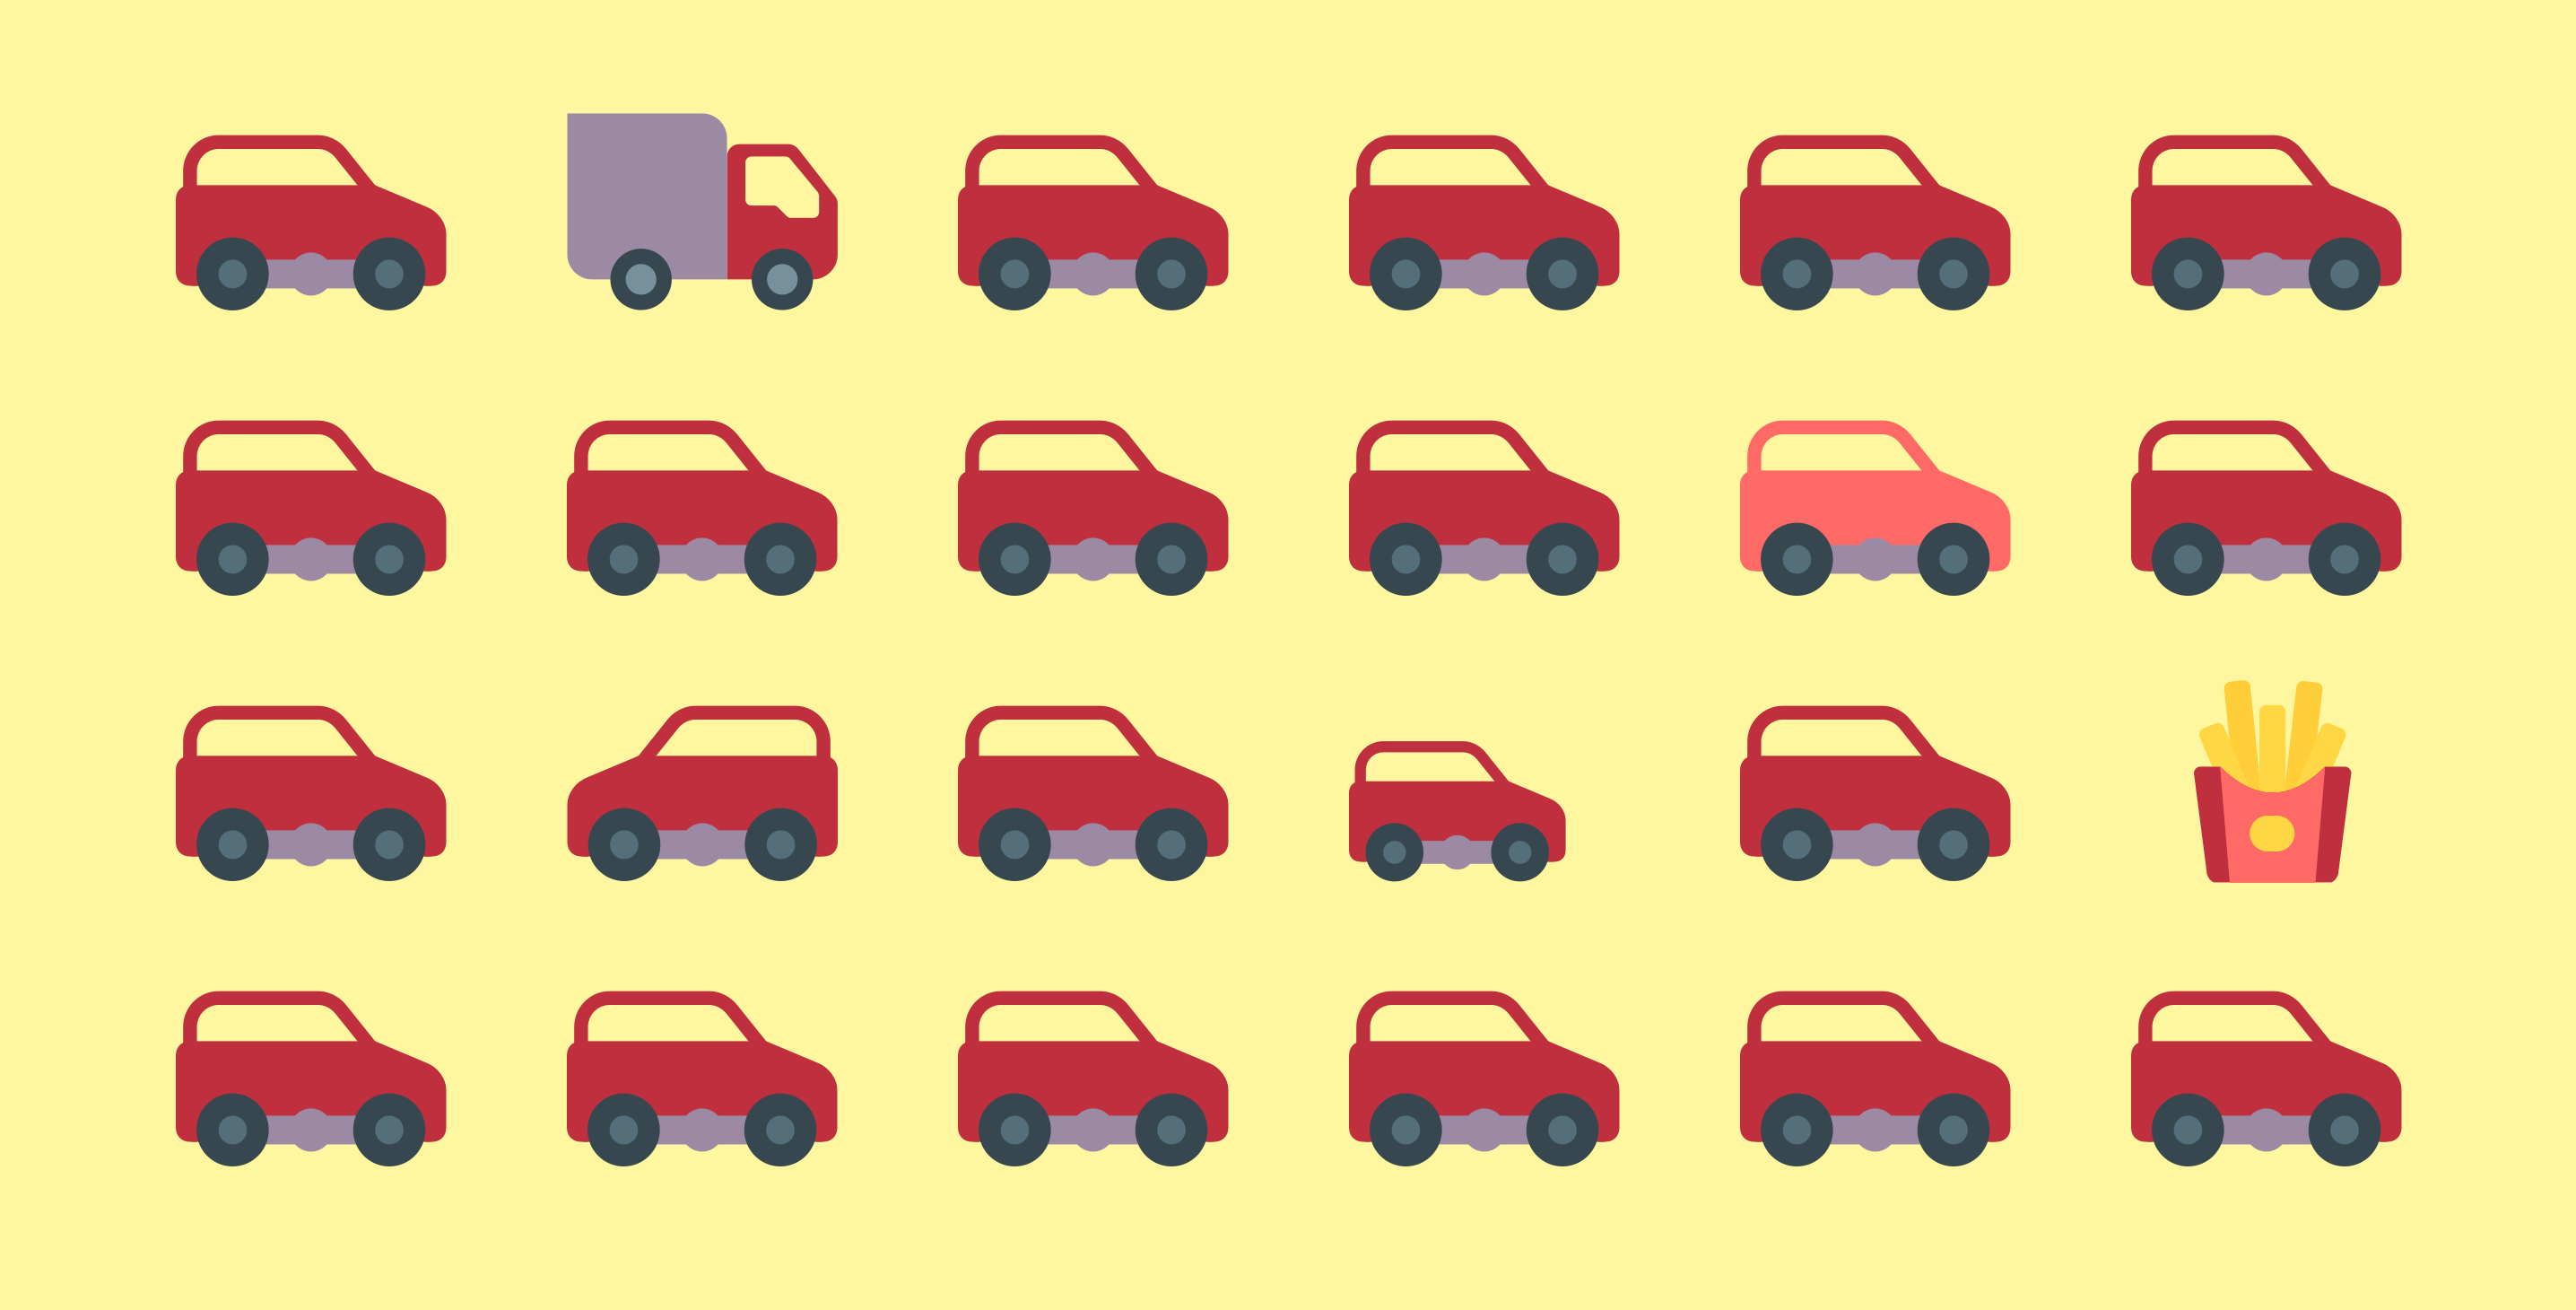 Illustration depicting a grid of cars, some being modified slightly in size, color, position, etc.